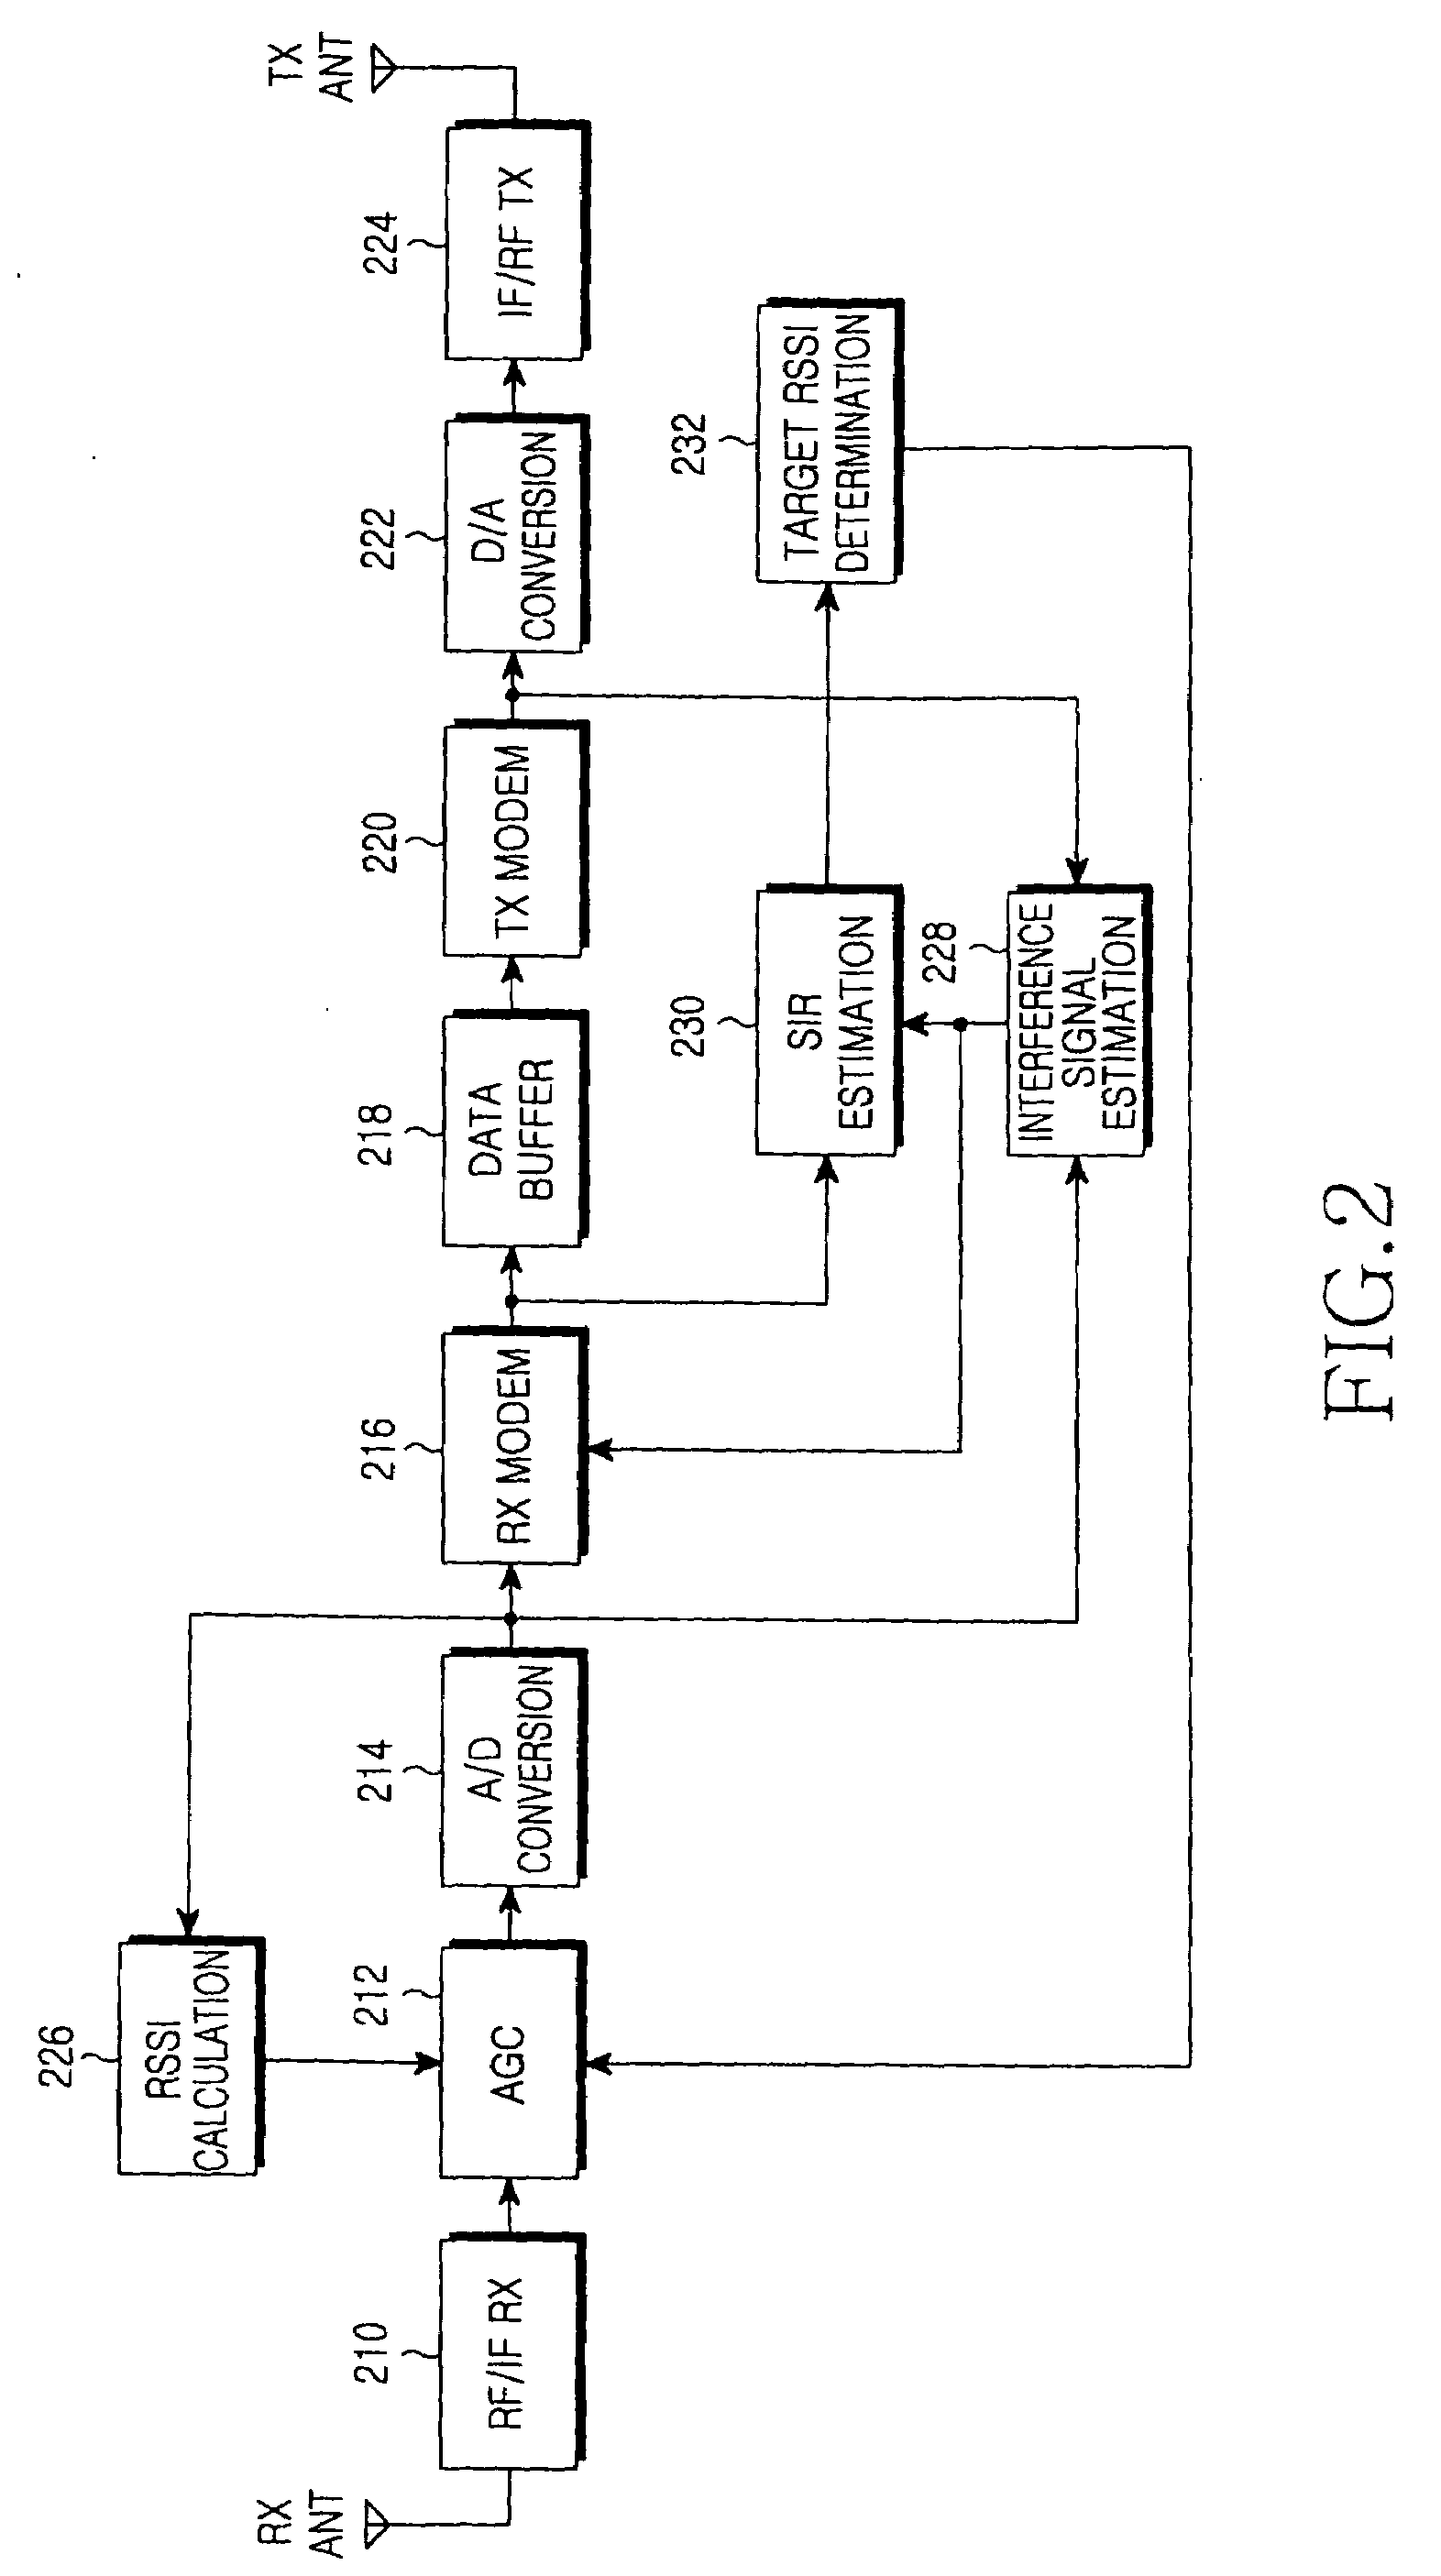 Automatic gain control apparatus and method in a wireless communication system